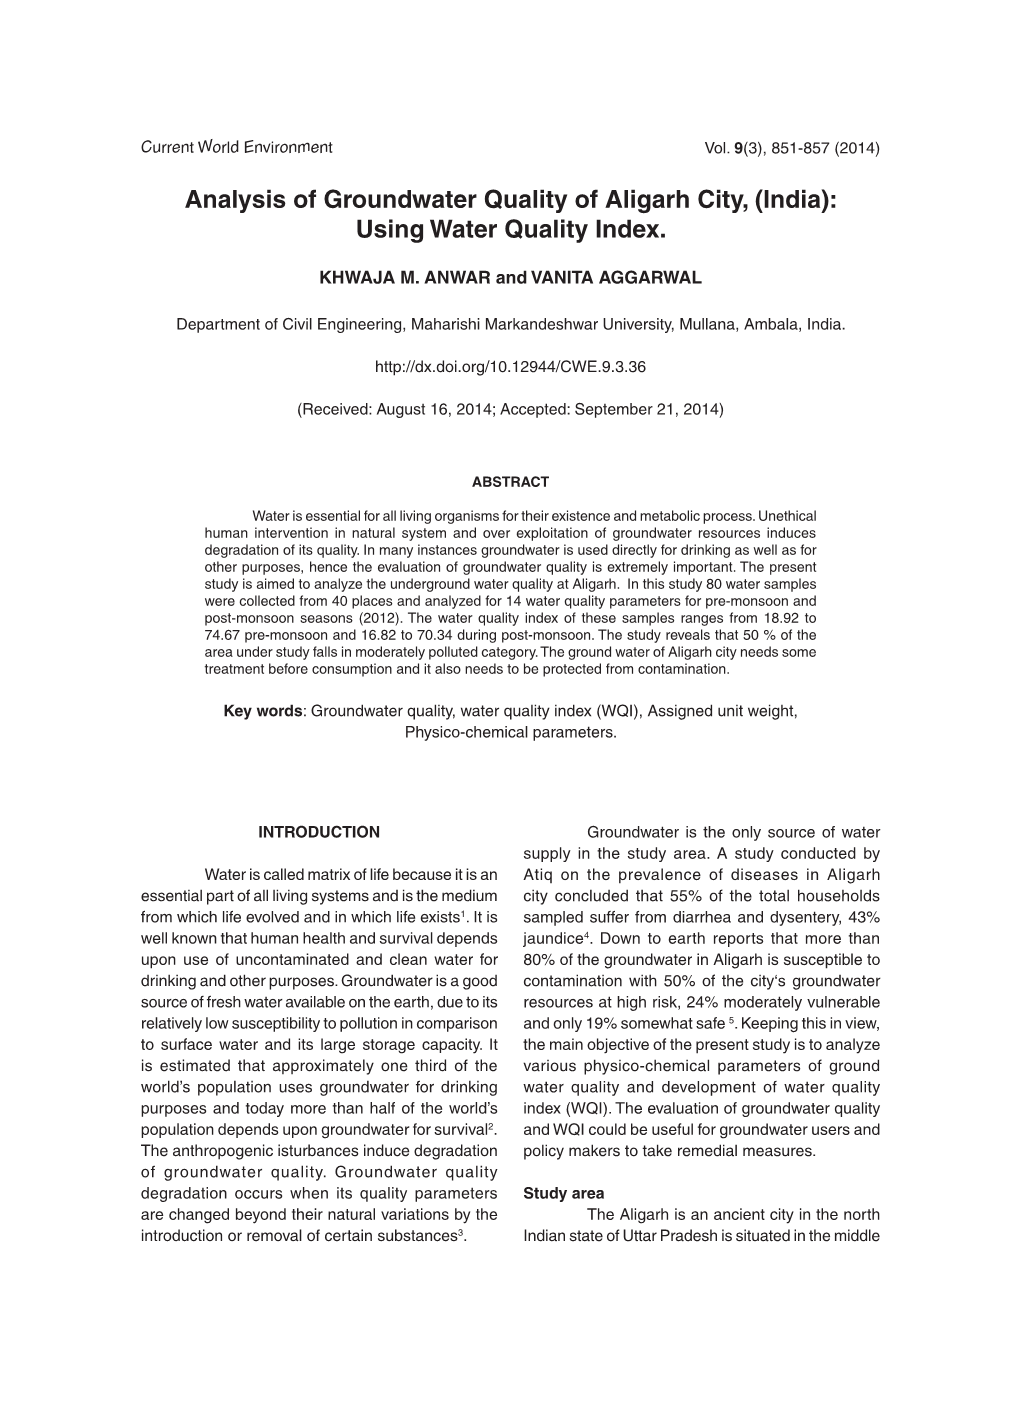 Analysis of Groundwater Quality of Aligarh City, (India): Using Water Quality Index